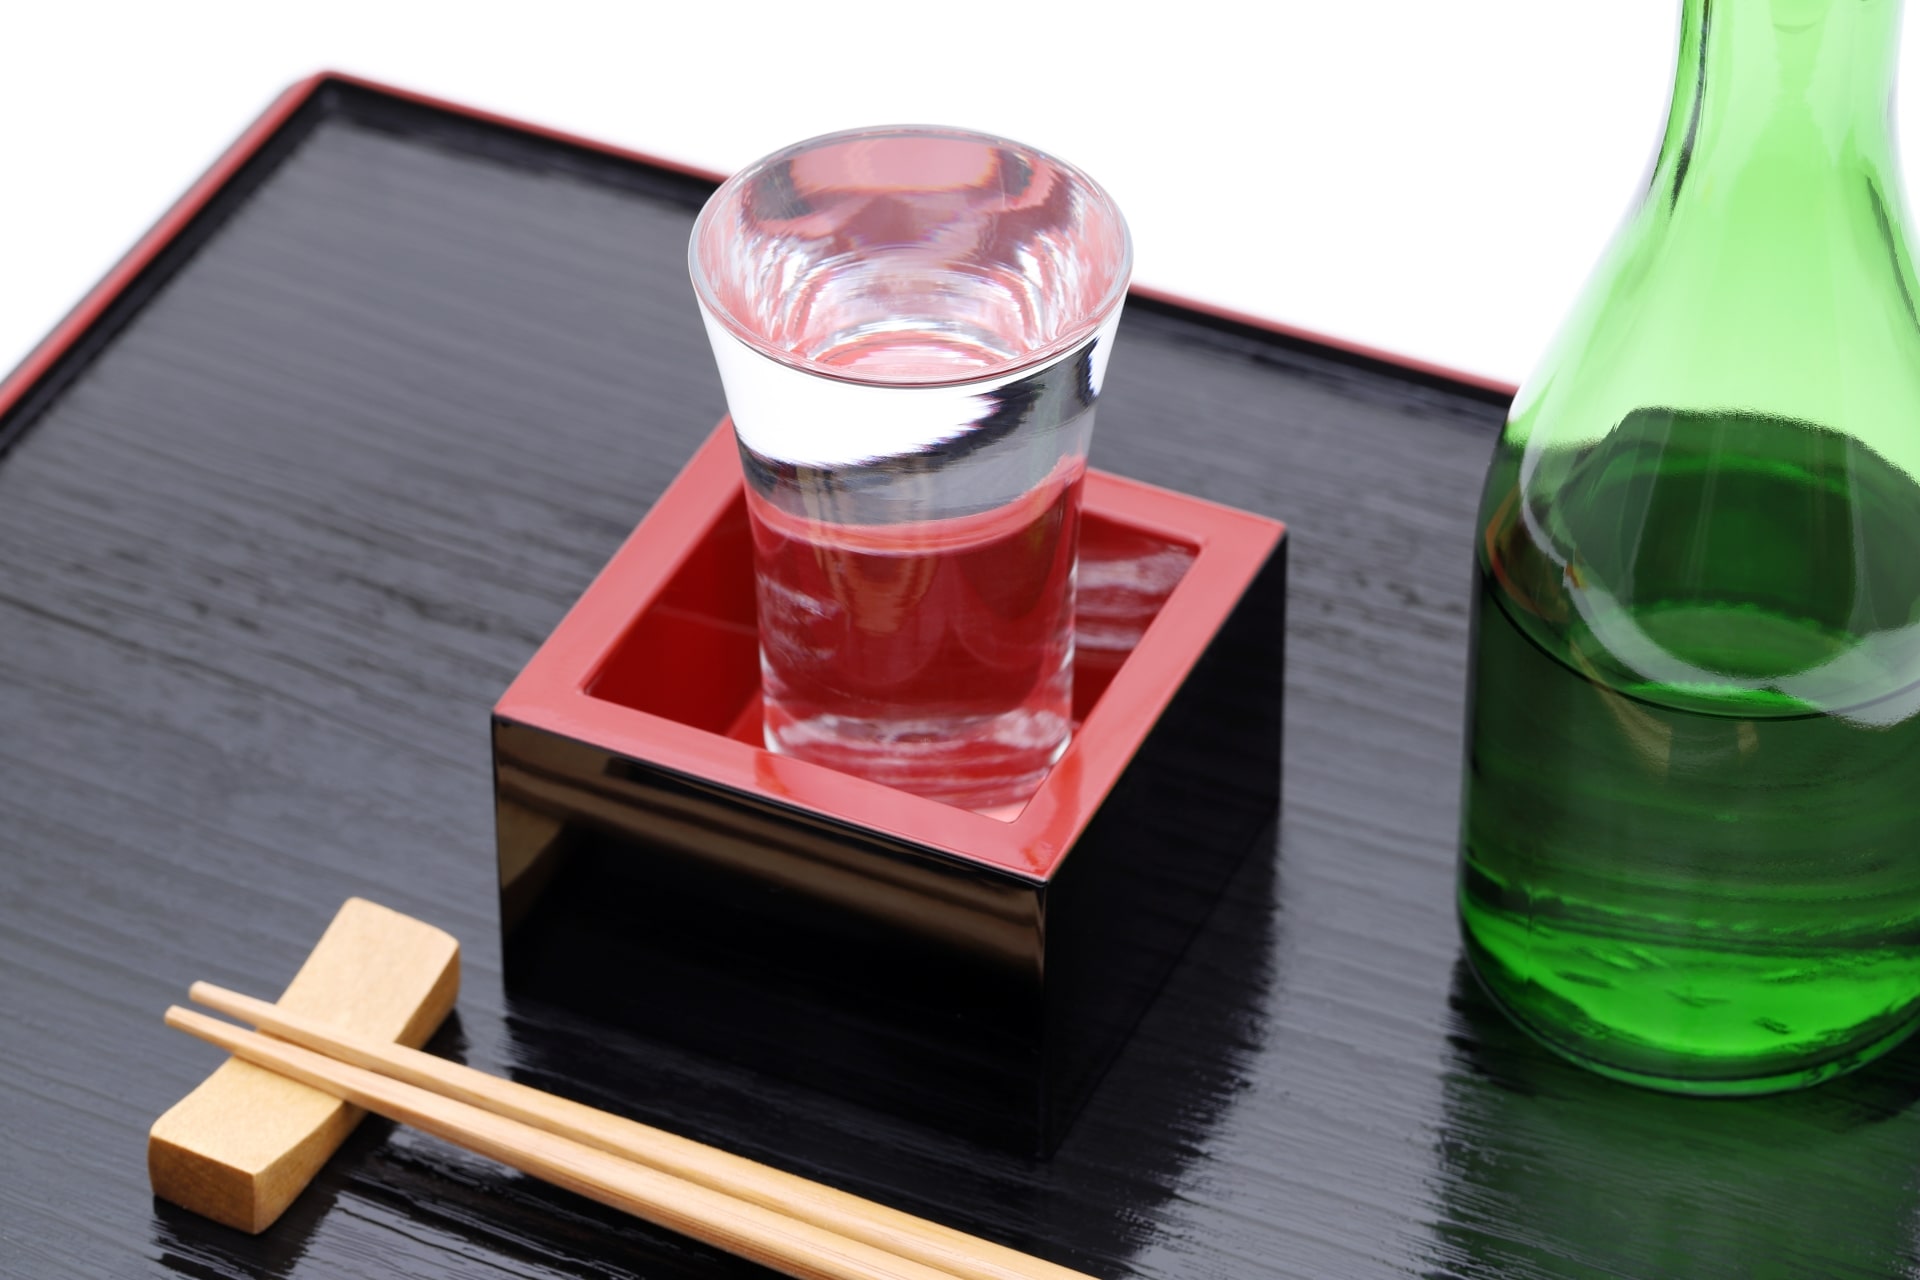 Sake tasting in Japan event schedule for January February and March